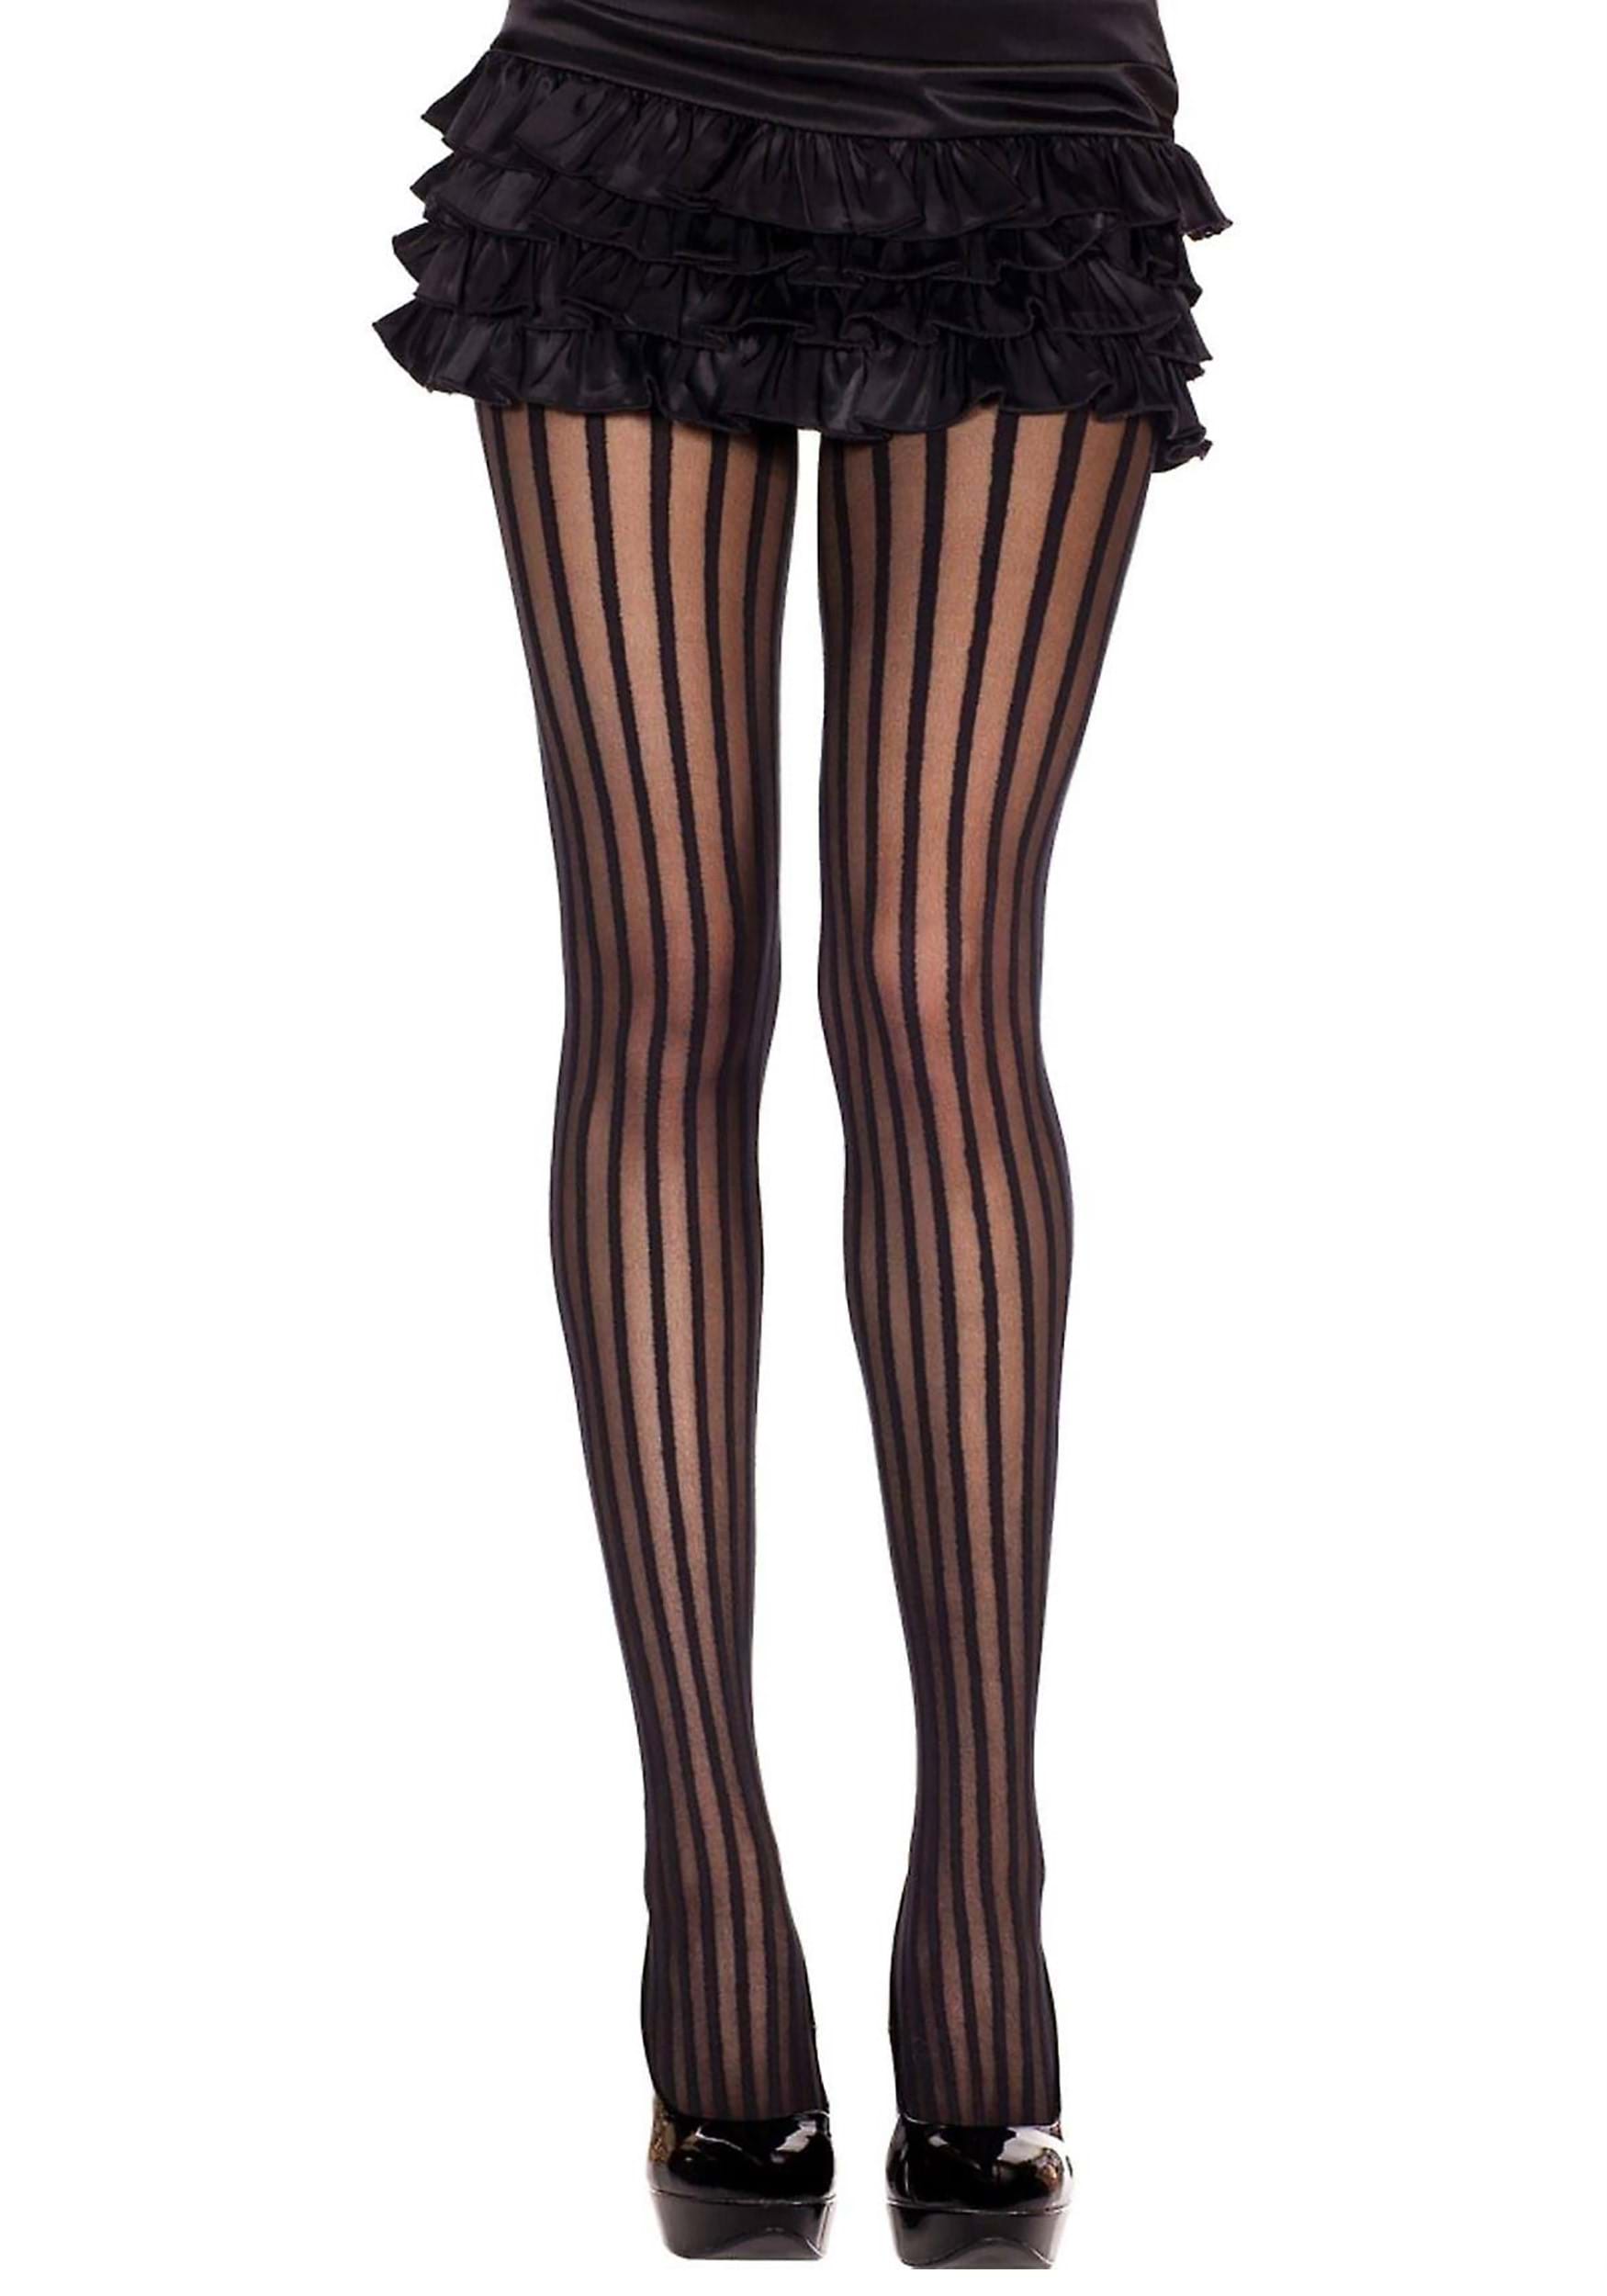 https://images.halloween.com/products/93415/1-1/womens-vertical-black-stripe-tights.jpg